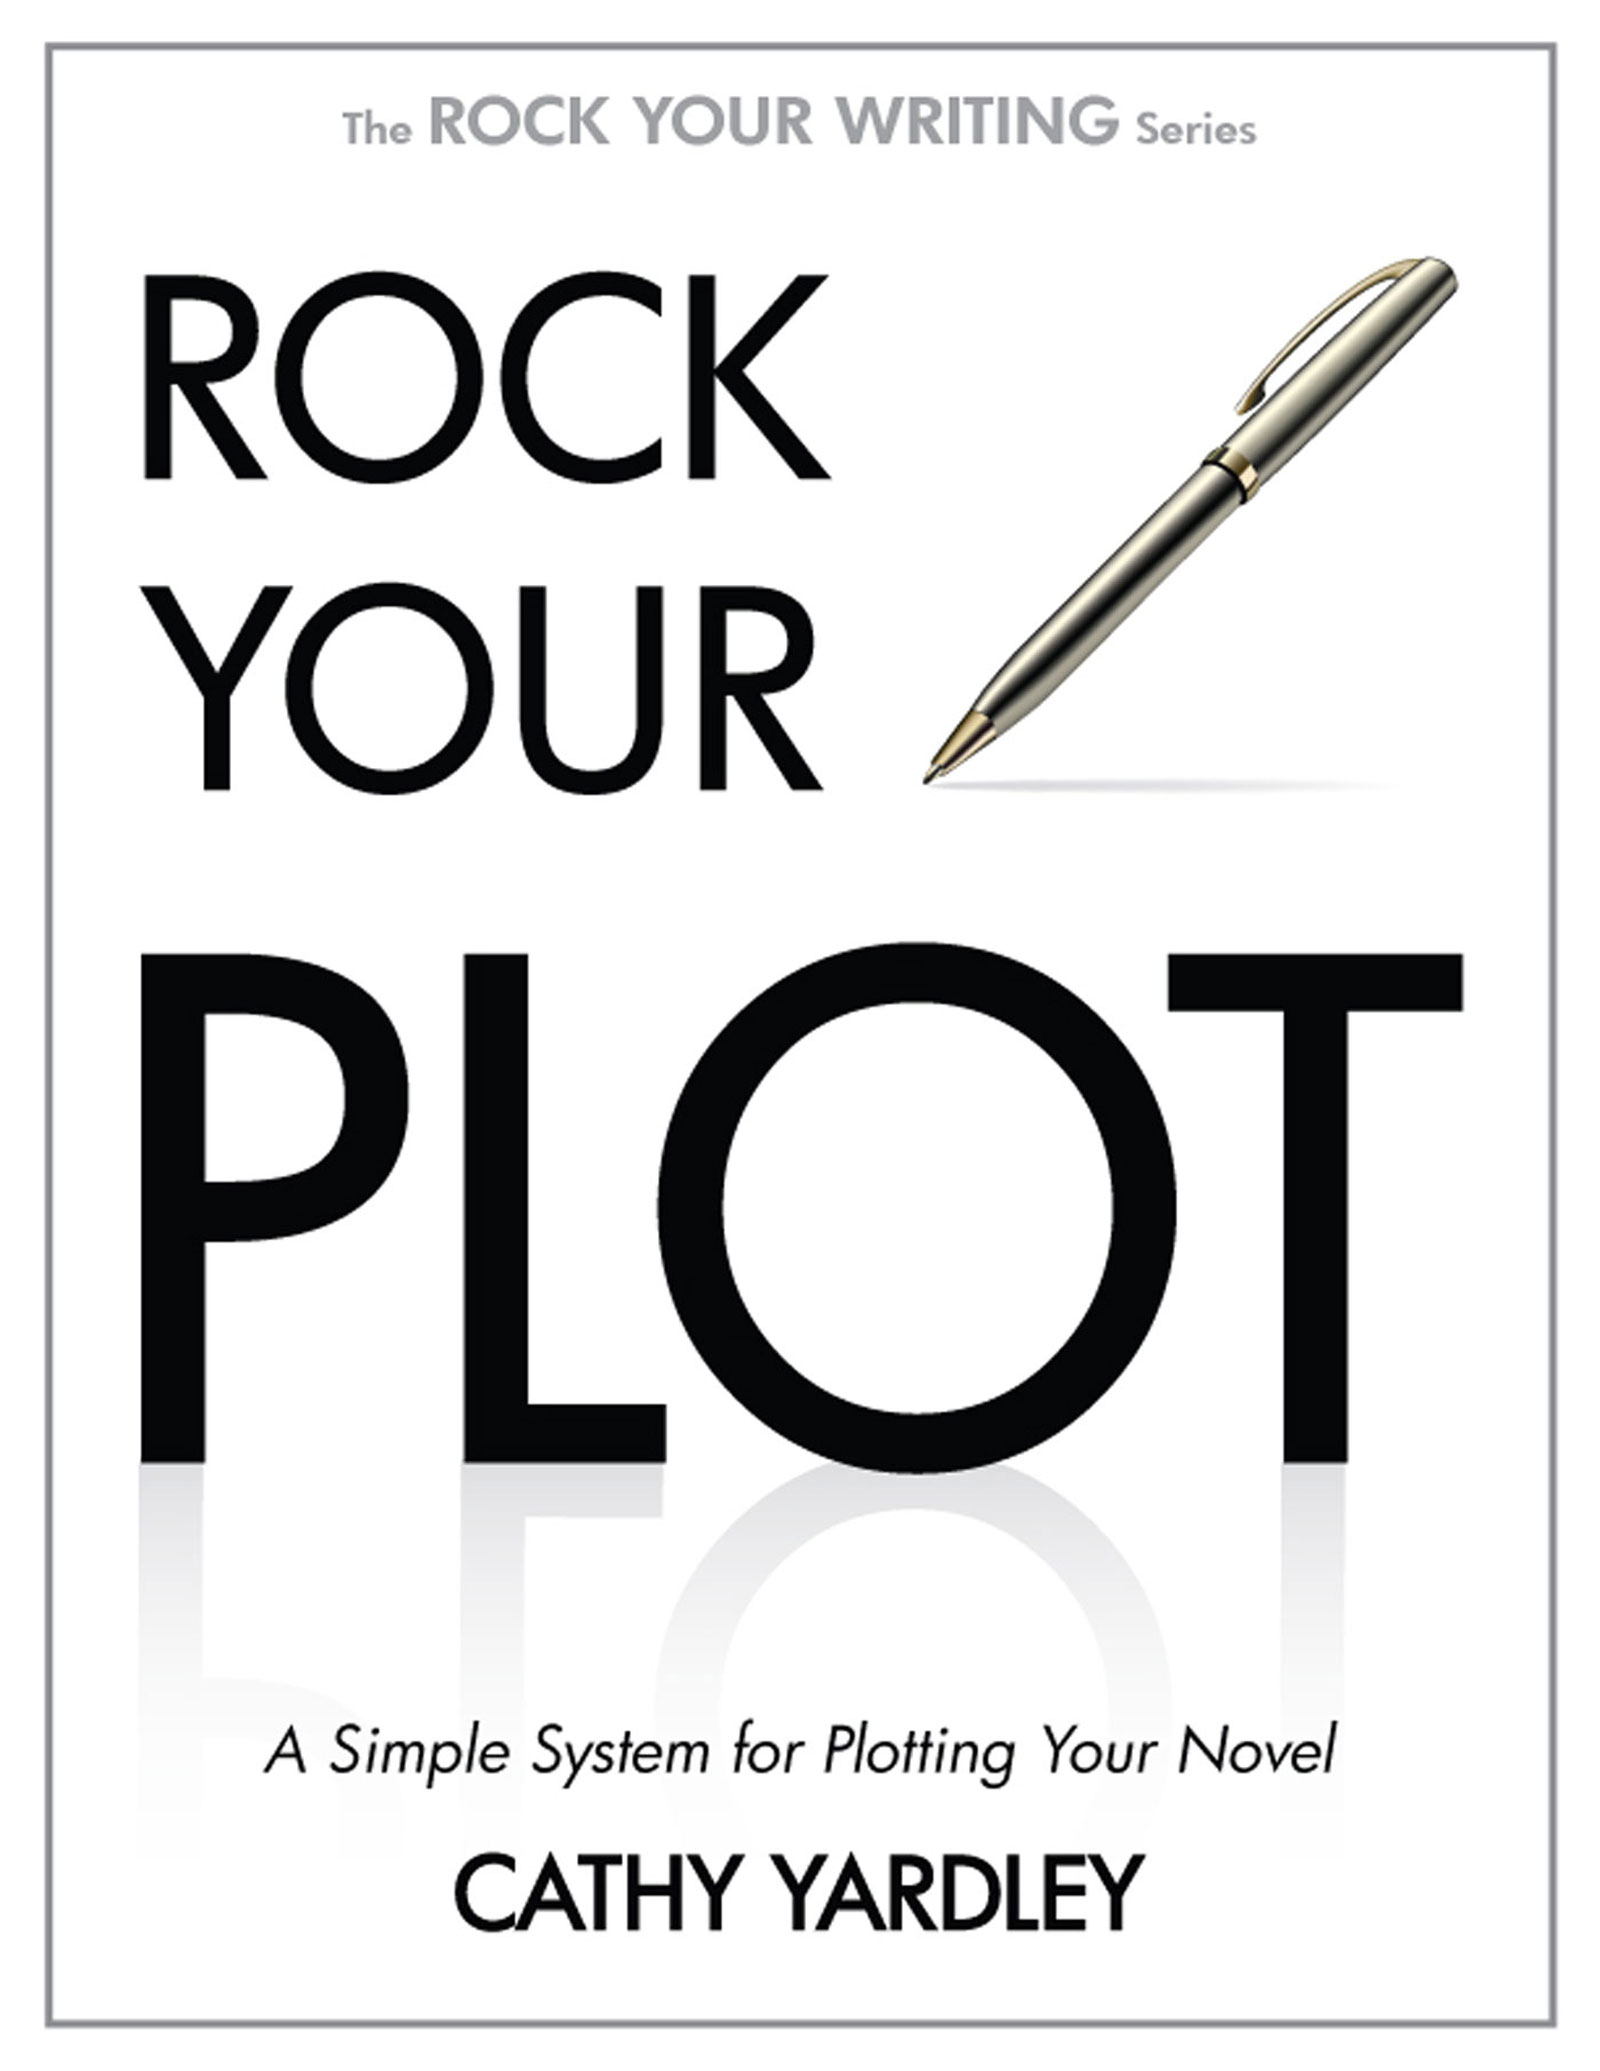 ROCK YOUR PLOT: A Simple System for Plotting Your Novel by Cathy Yardley